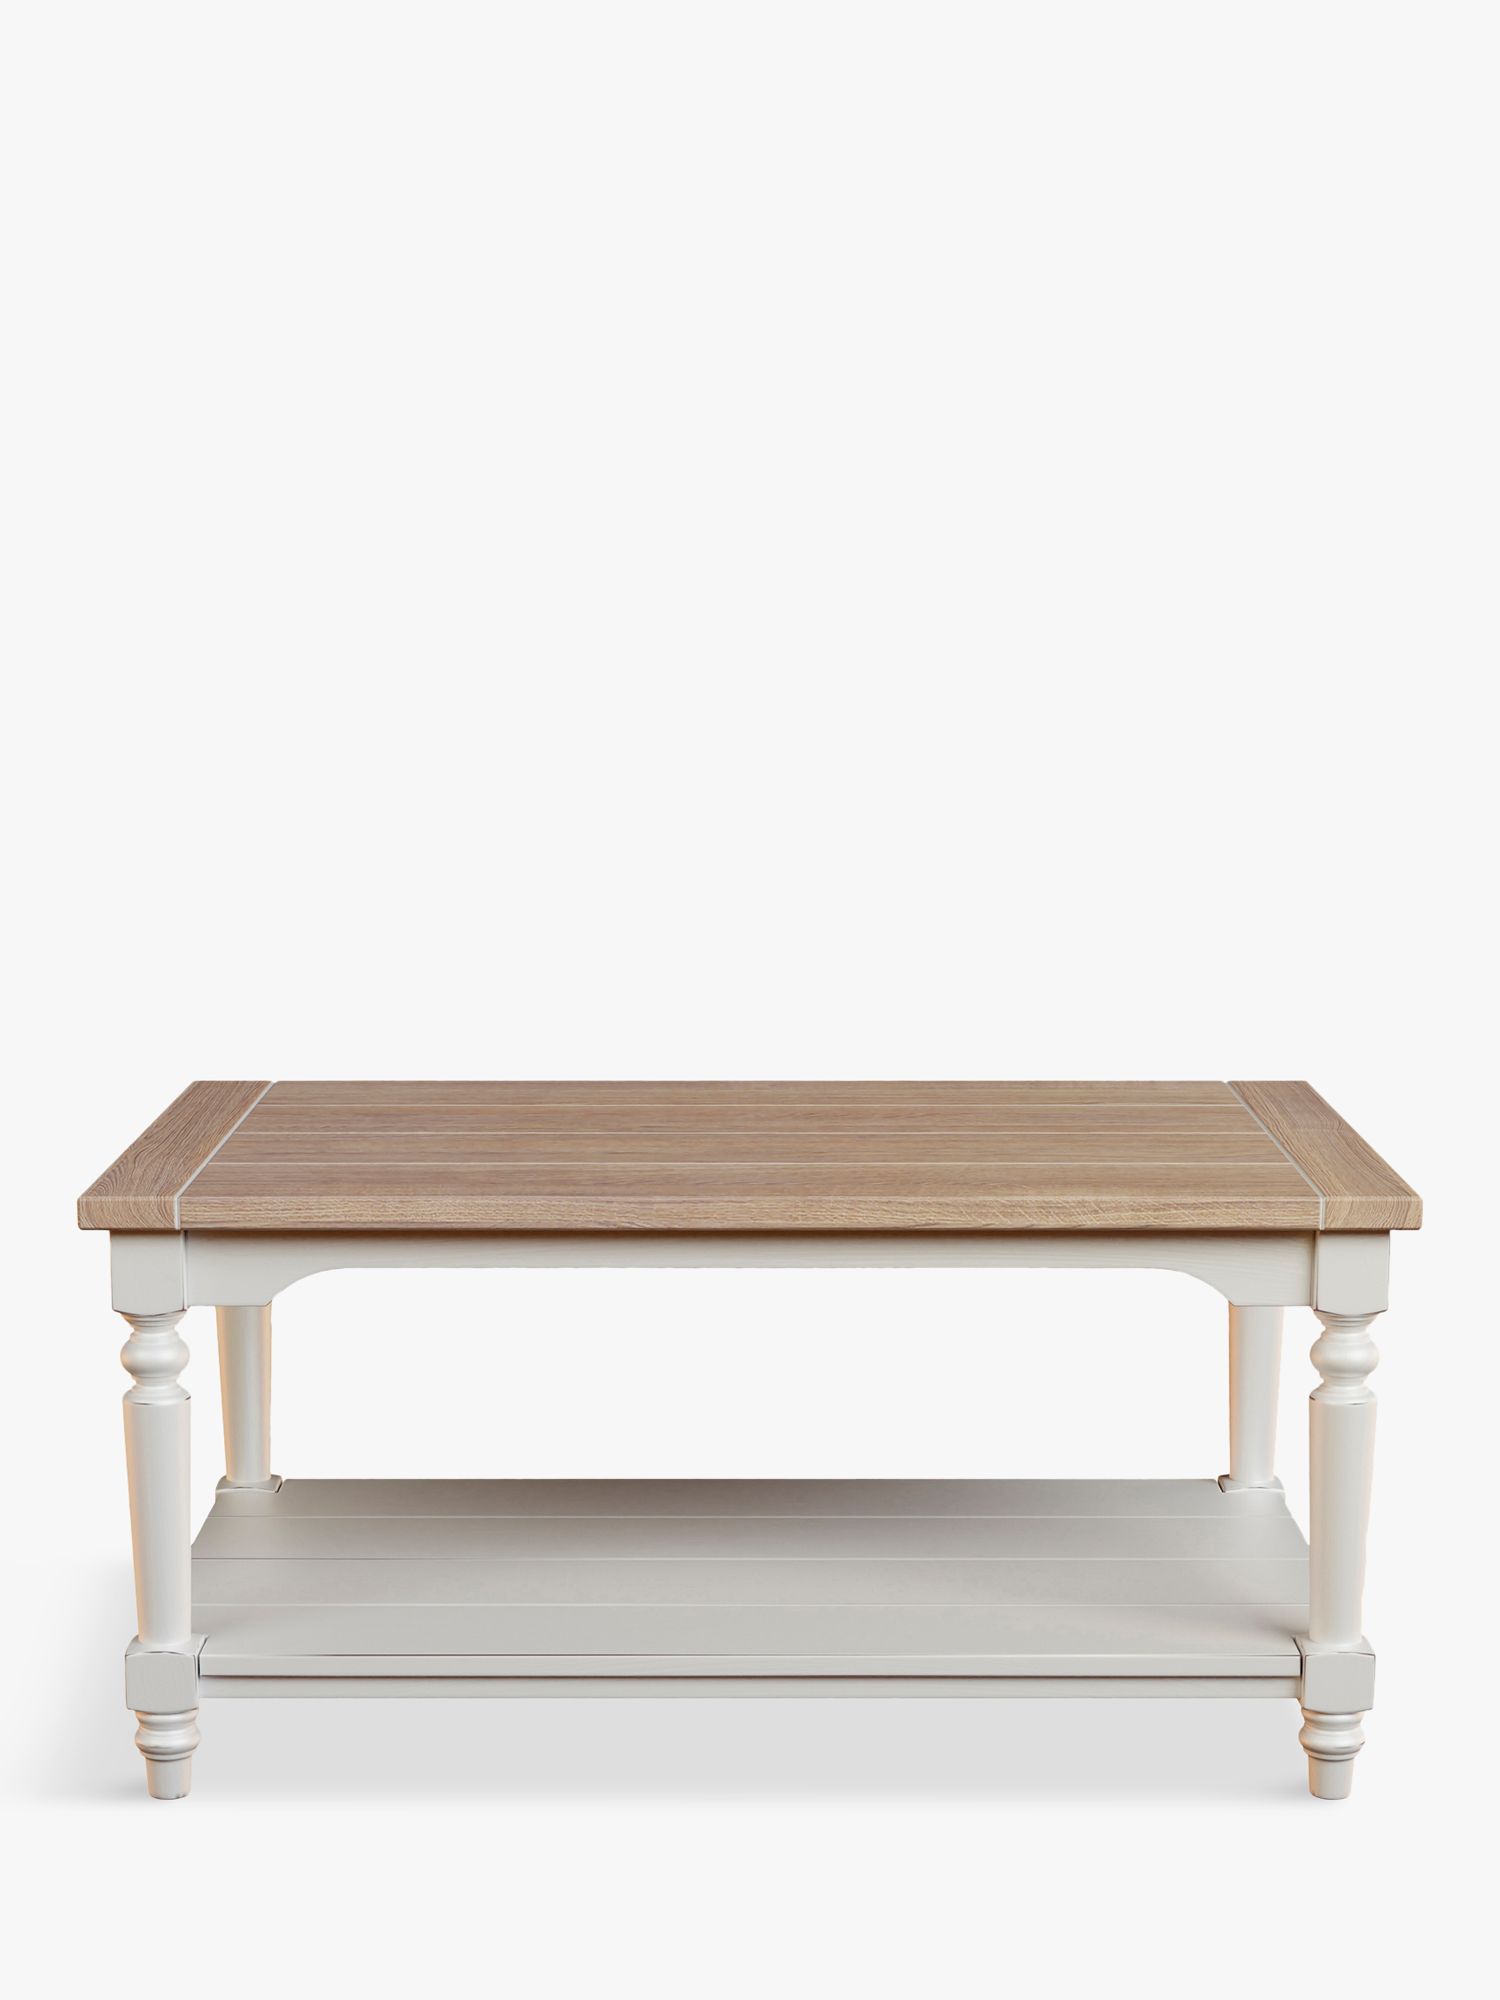 Photo of Laura ashley dorset coffee table white/natural